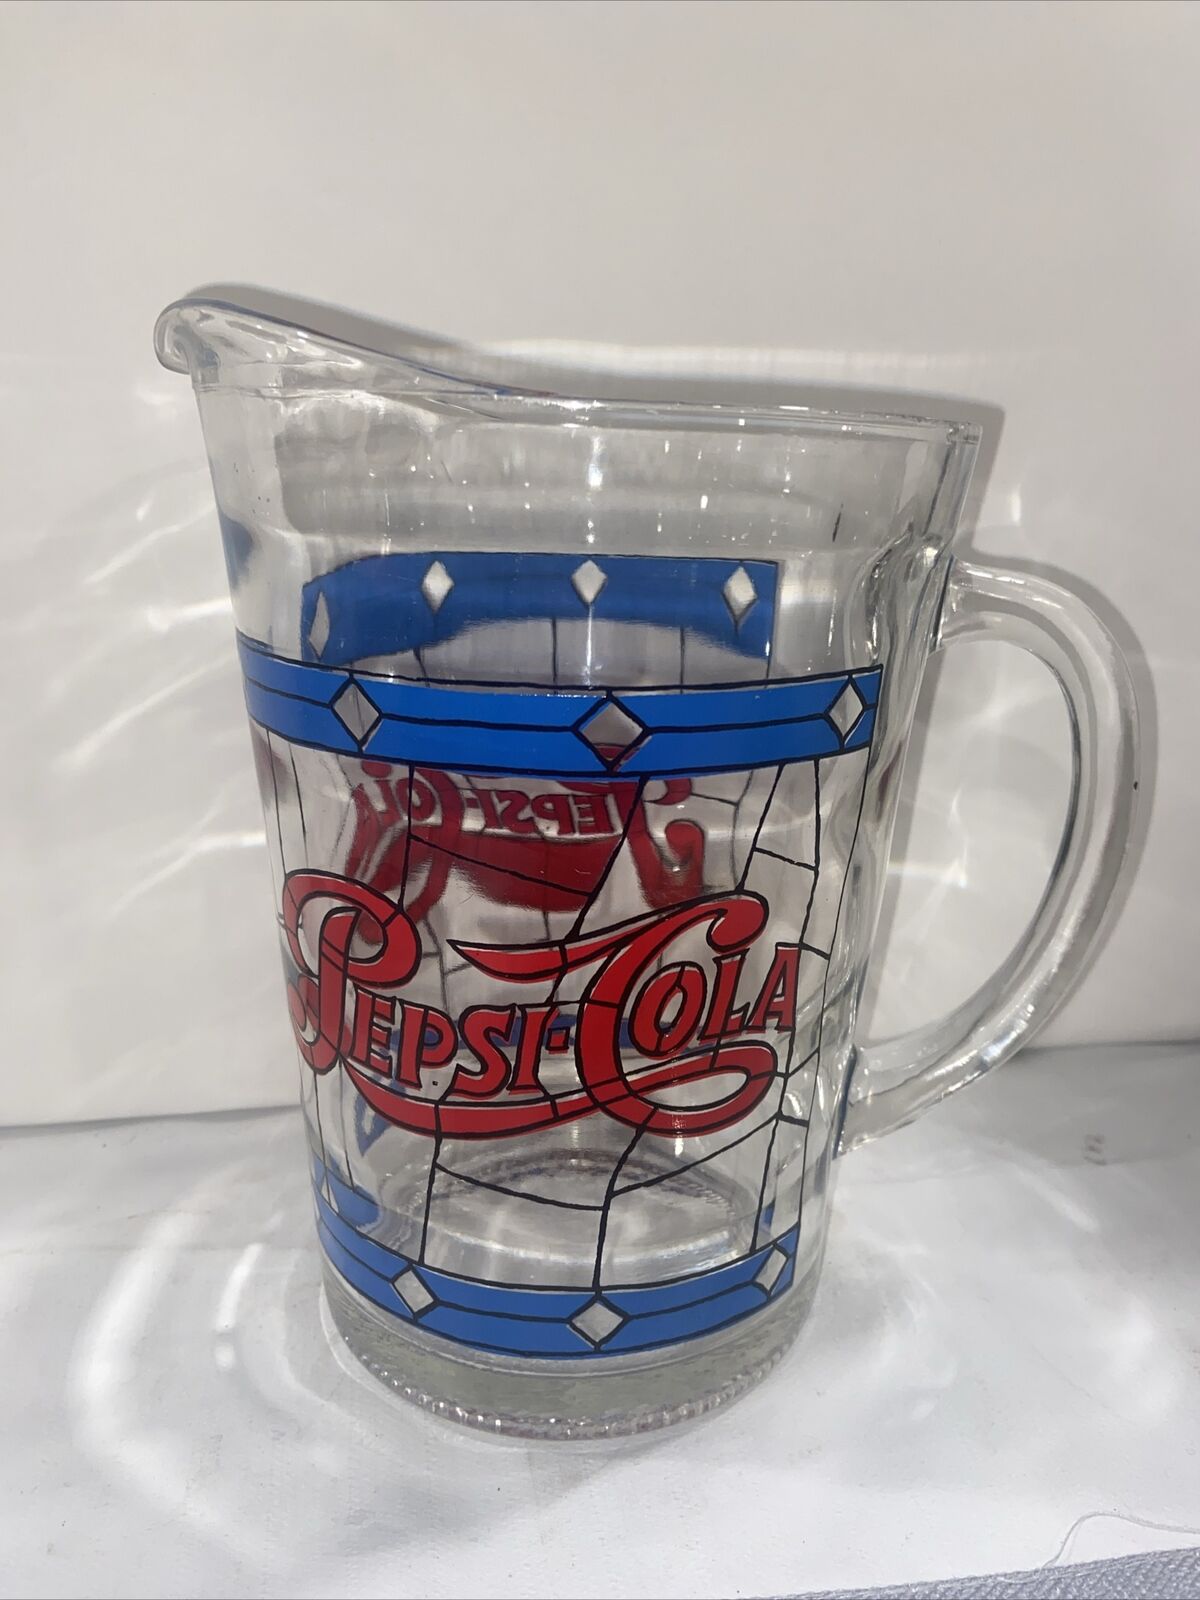 Vtg 1970'S Pepsi Cola Pitcher Tiffany Style Stained Glass Design